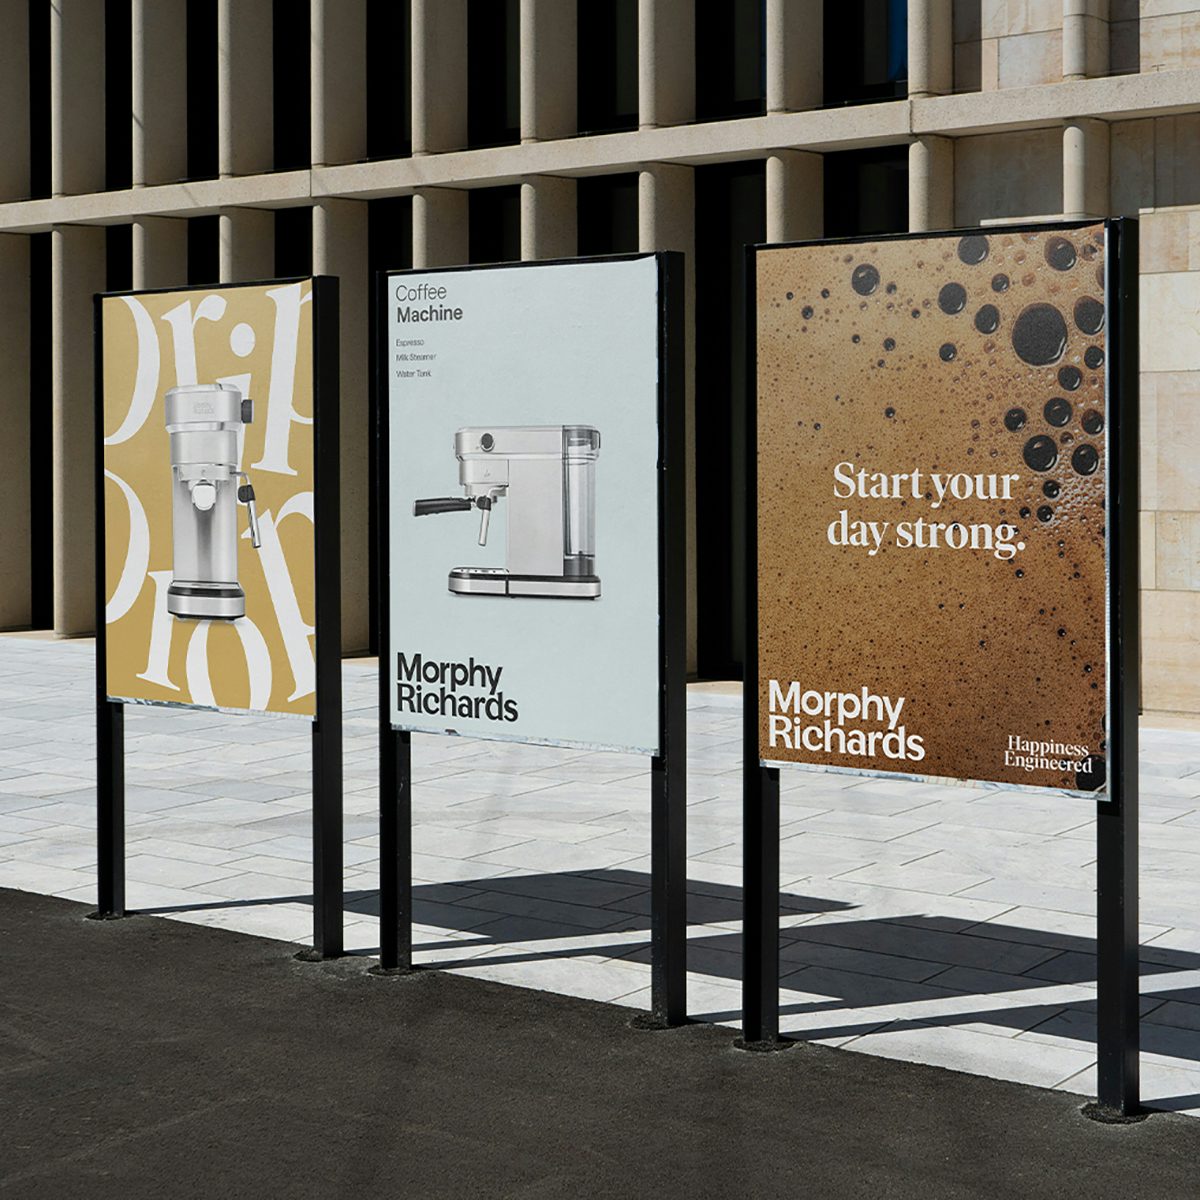 Photograph of three outdoor Morphy Richards advertisements for a coffee maker, showing brand identity design by Otherway